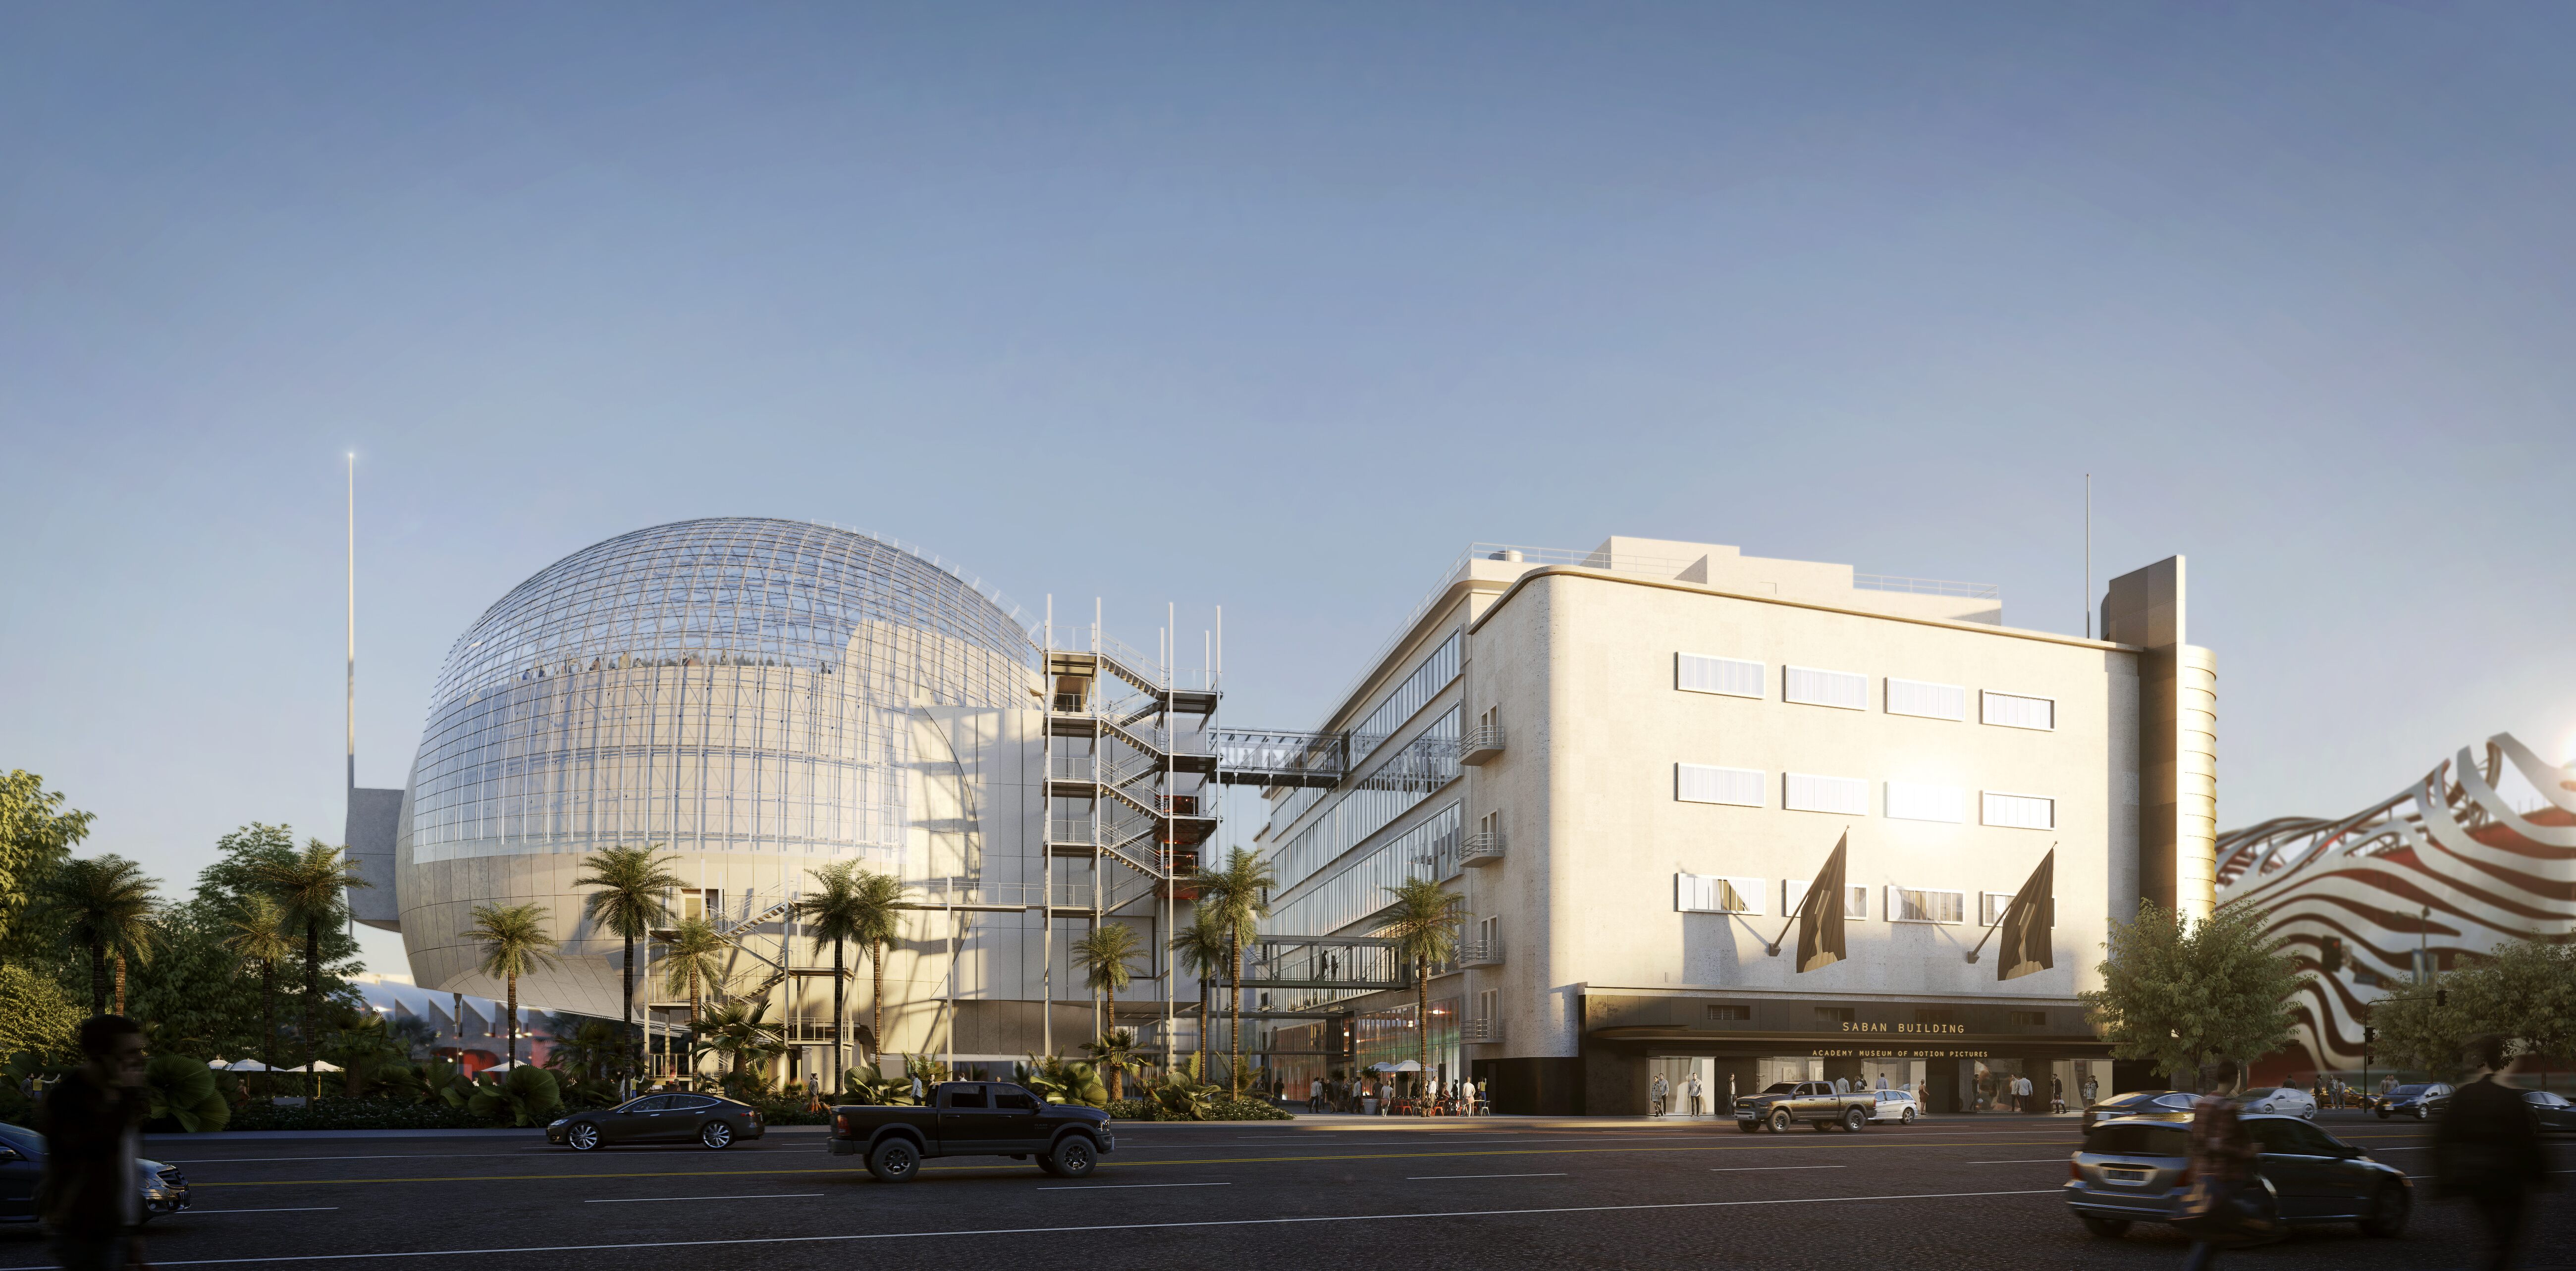 ACADEMY MUSEUM OF MOTION PICTURES REVEALS  NEW DETAILS OF INAUGURAL EXHIBITIONS